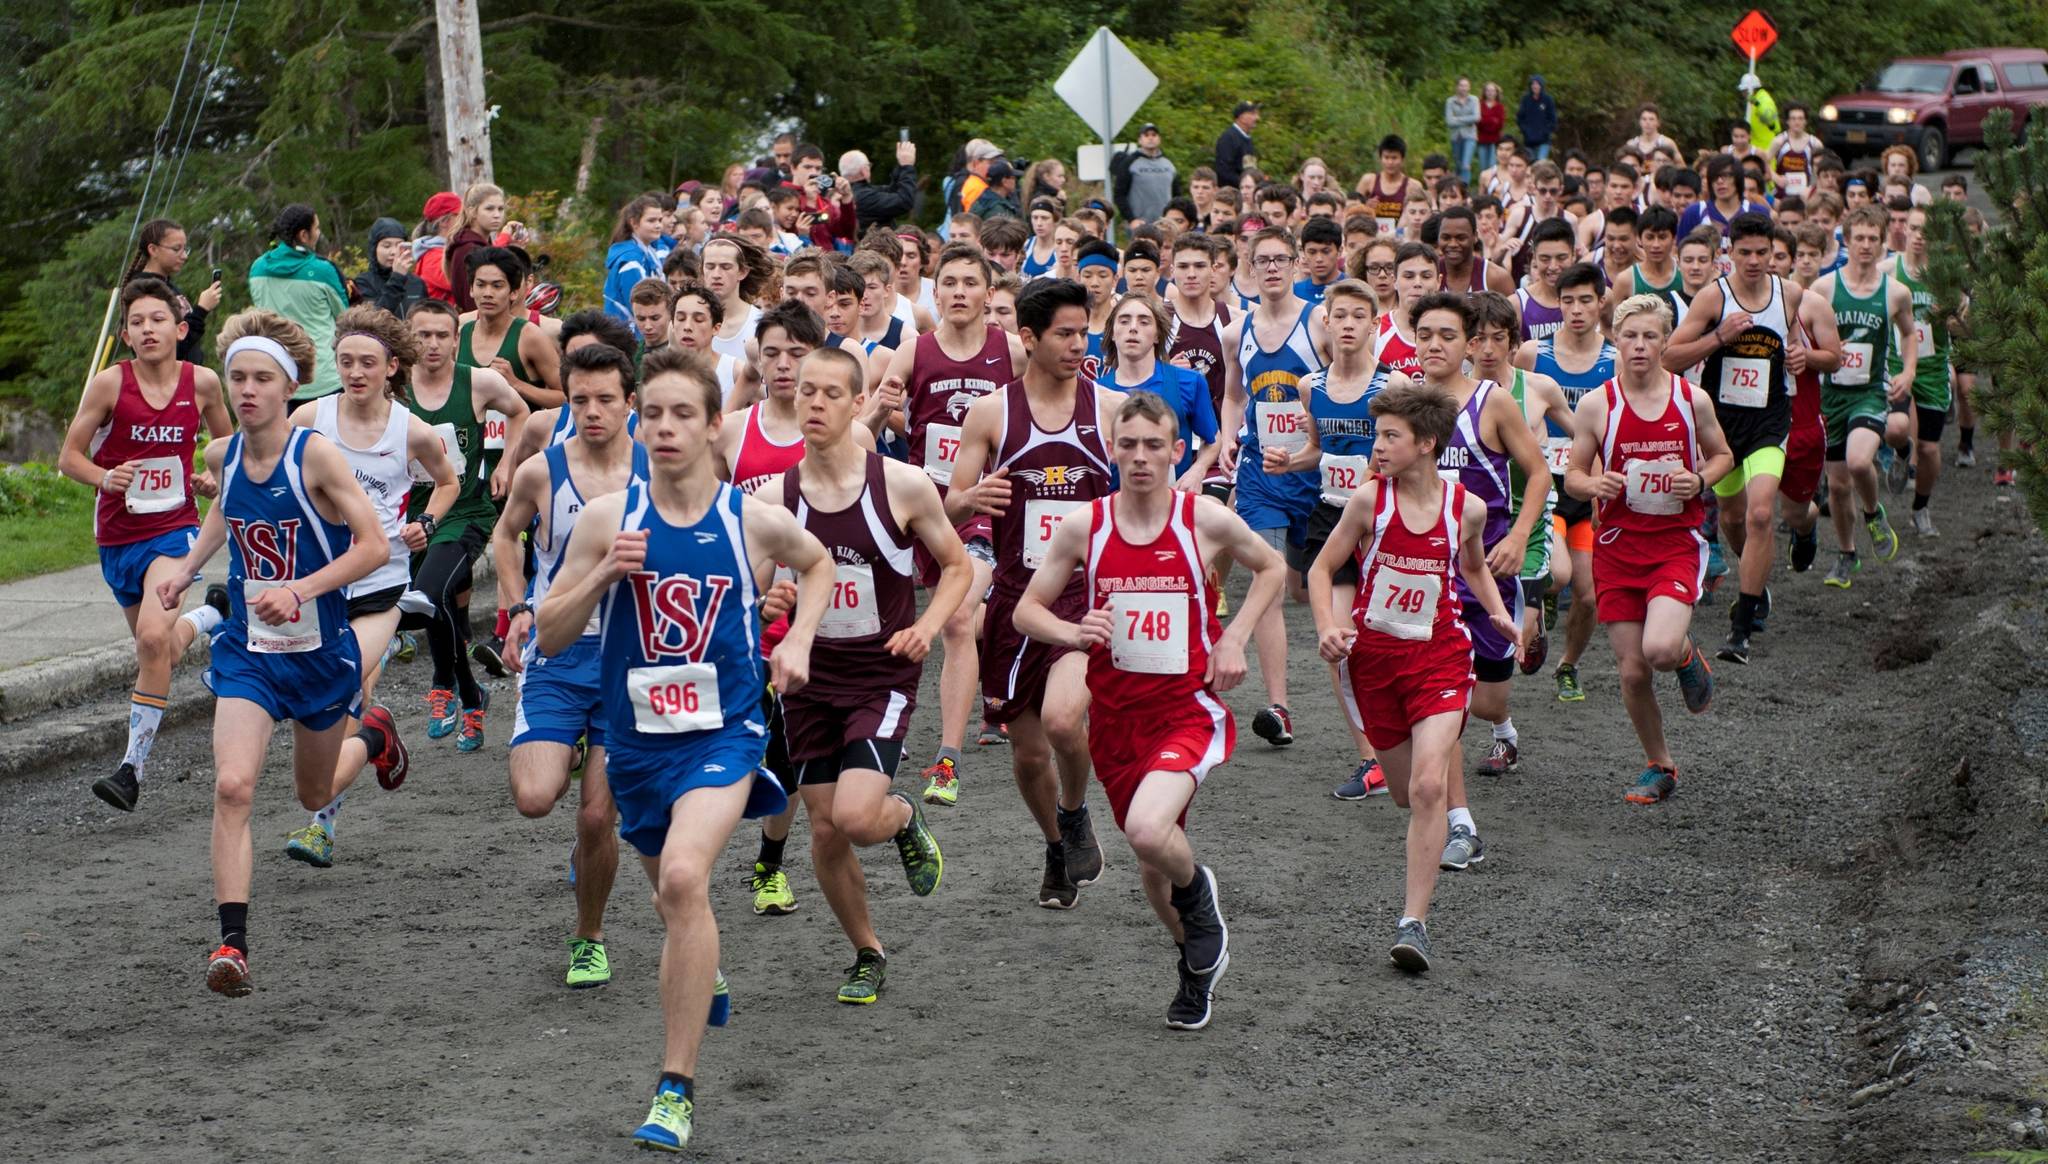 Runners jostle for position at the start of a cross country meet in Sitka on Sept. 16. (James Pulson | Sitka Sentinel)